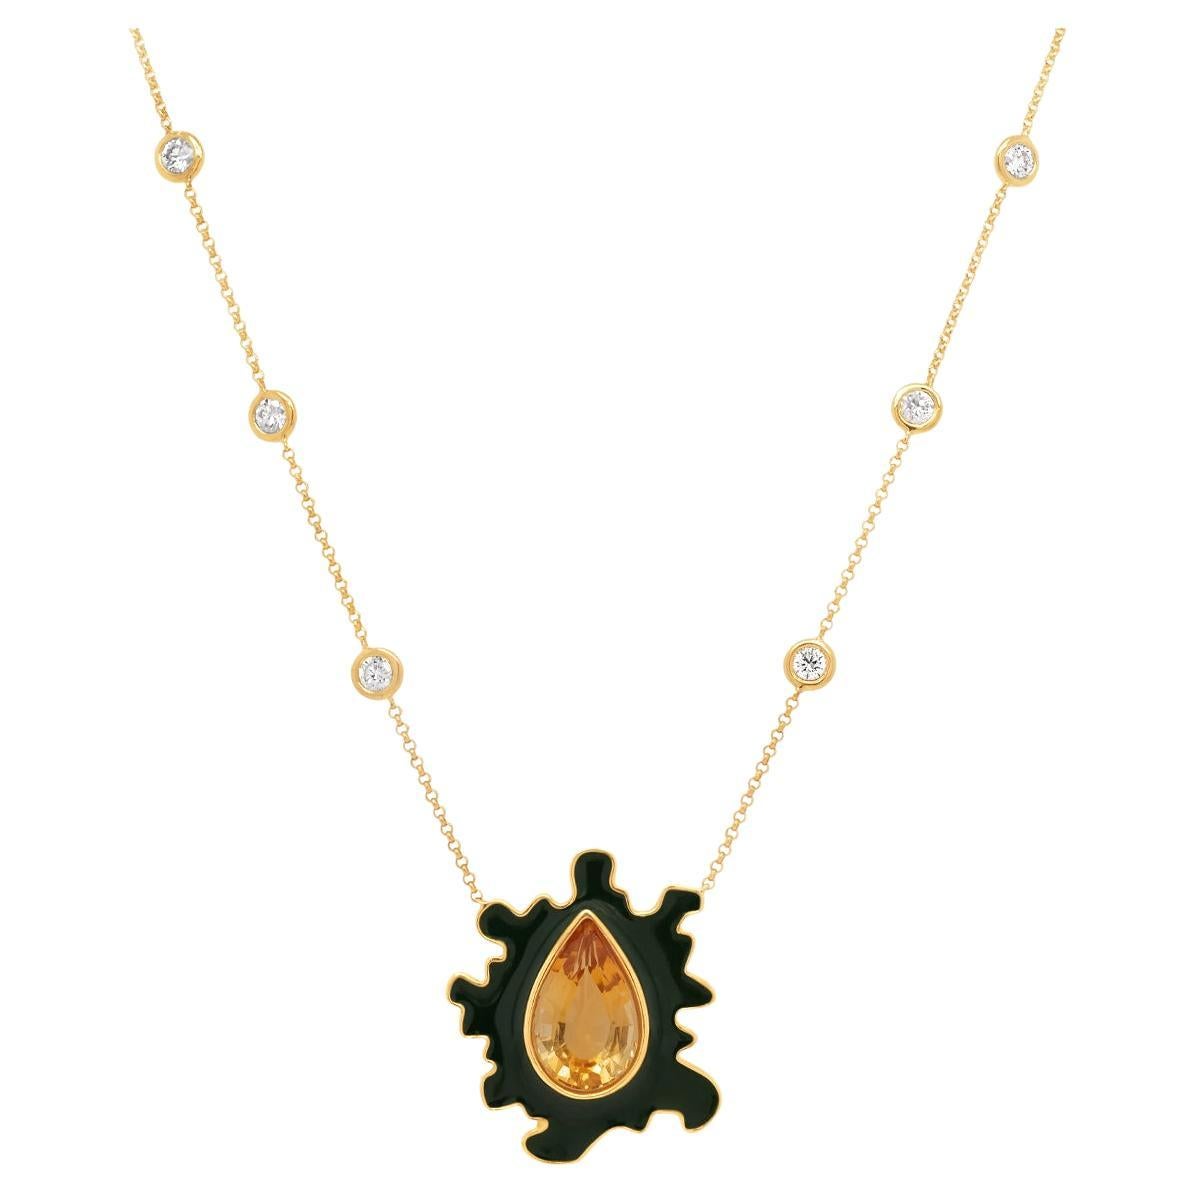 Psychedelic Solitaire Necklace 5.7gms 6.15ctw Citrine and Forest Enamel